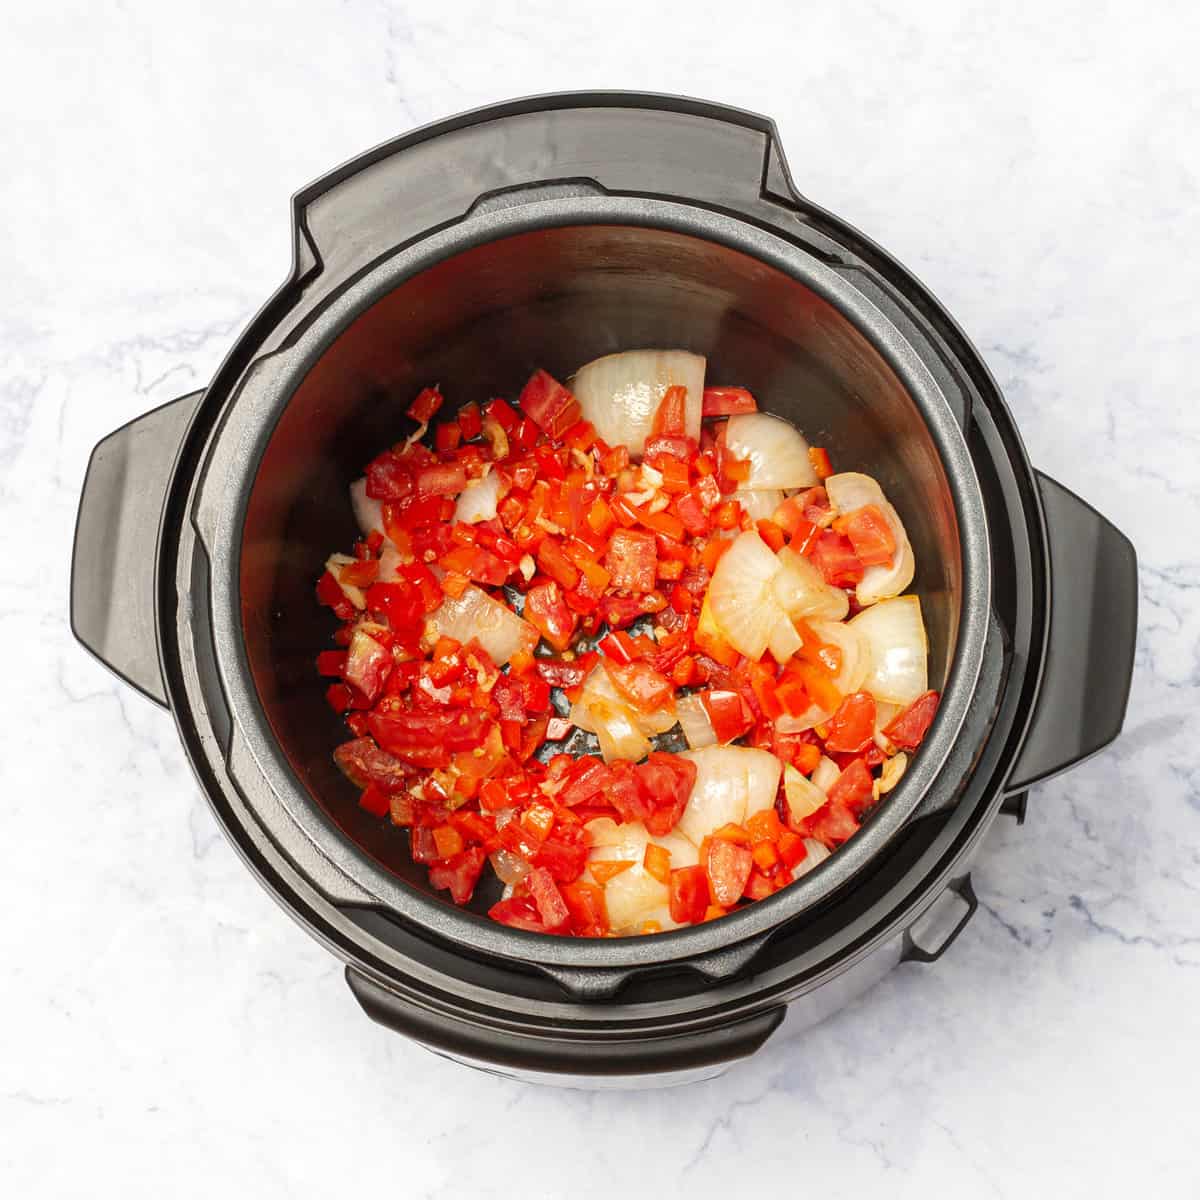 diced onion, minced garlic, diced tomatoes, and diced red bell pepper in instant pot